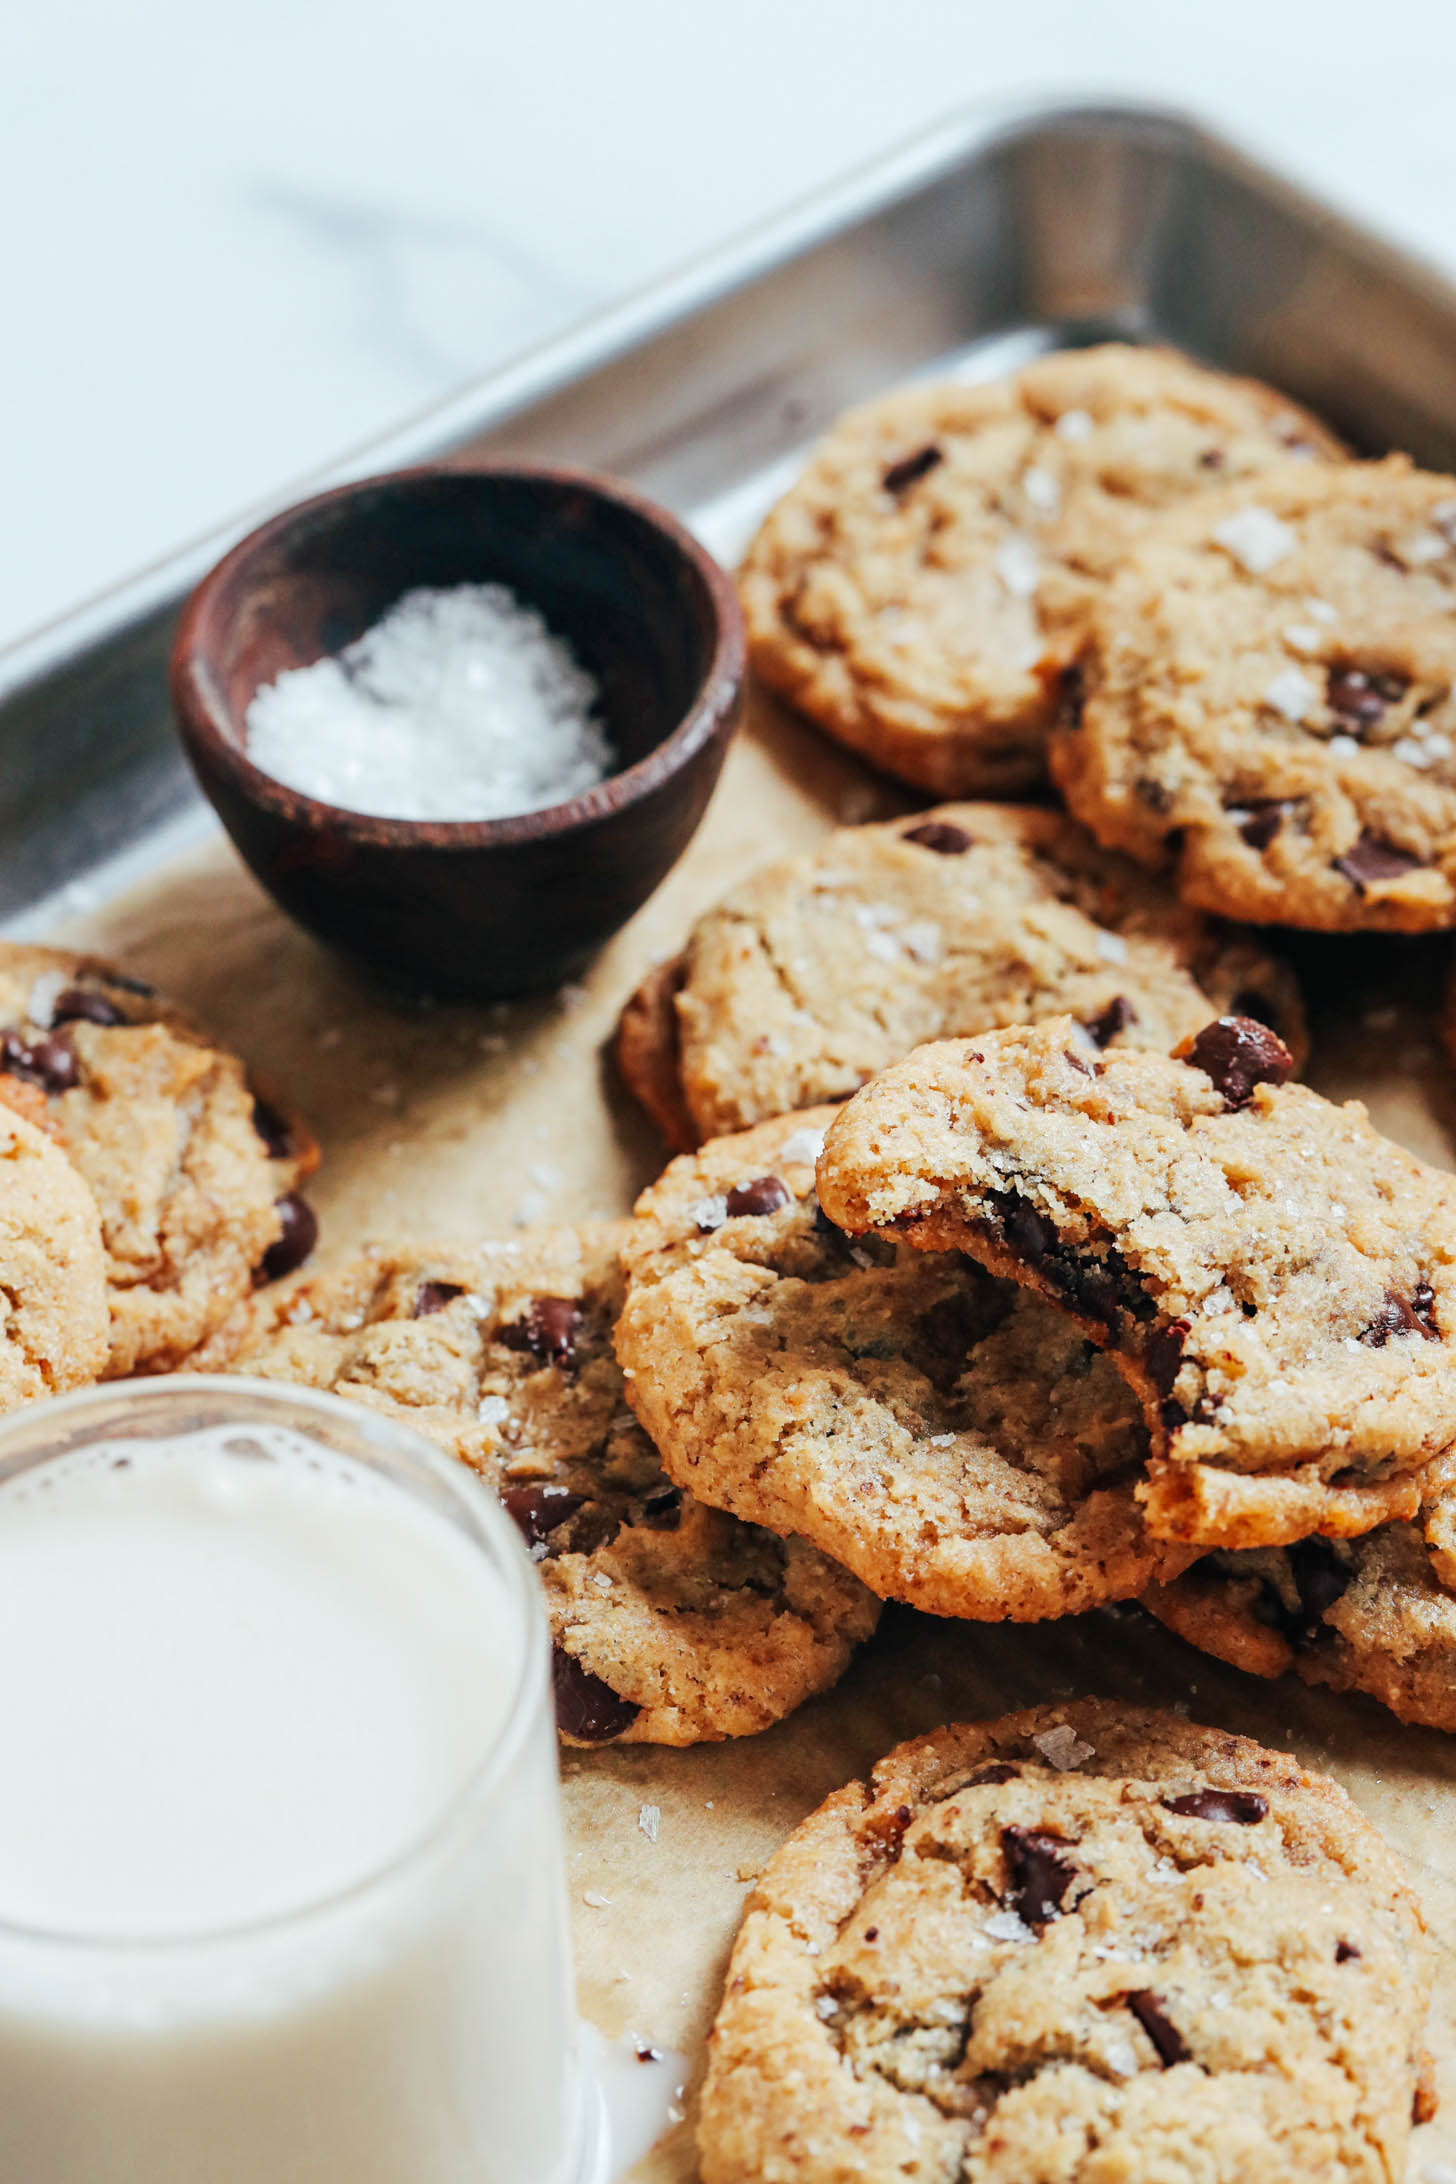 Flaky salt and dairy-free milk on a baking sheet of vegan gluten-free chocolate chip cookies